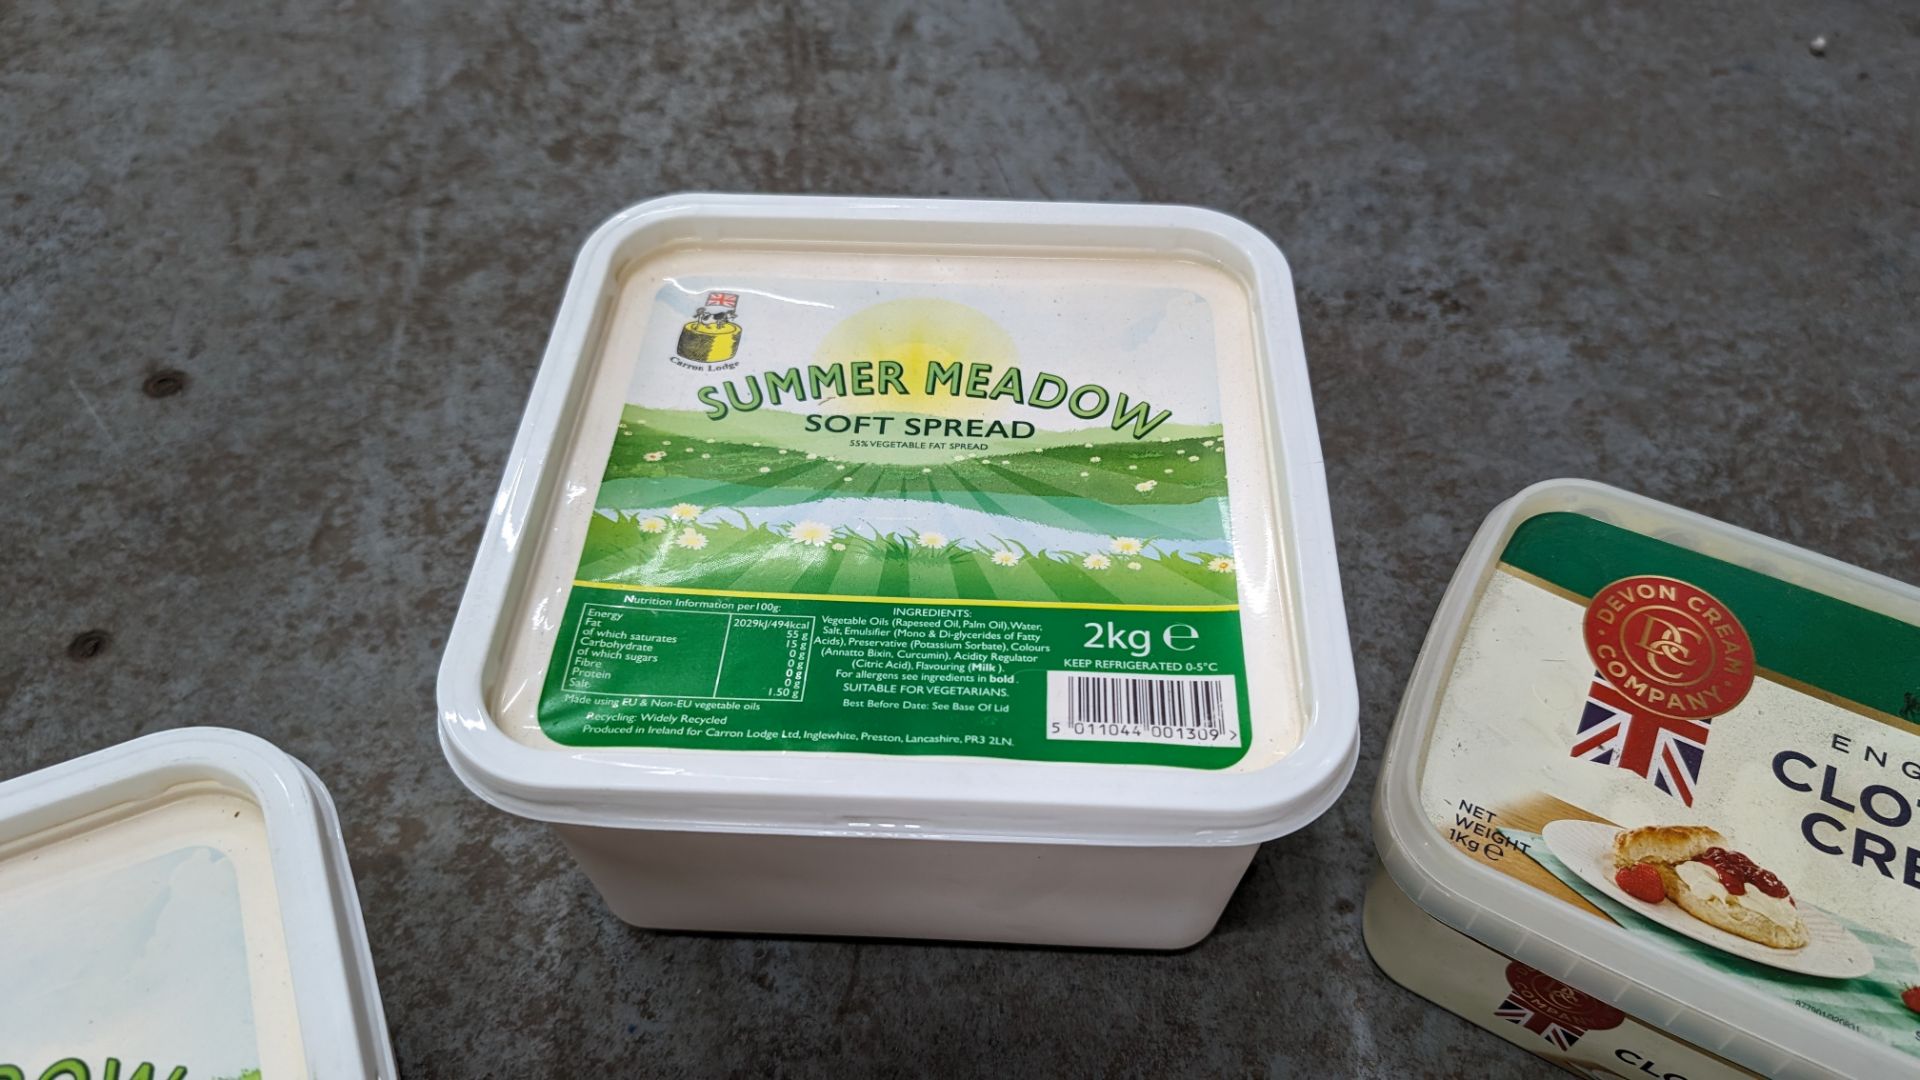 2 off 2kg tubs of Summer Meadow soft spread plus box of Meadow Churn individual packets of butter (1 - Image 6 of 6